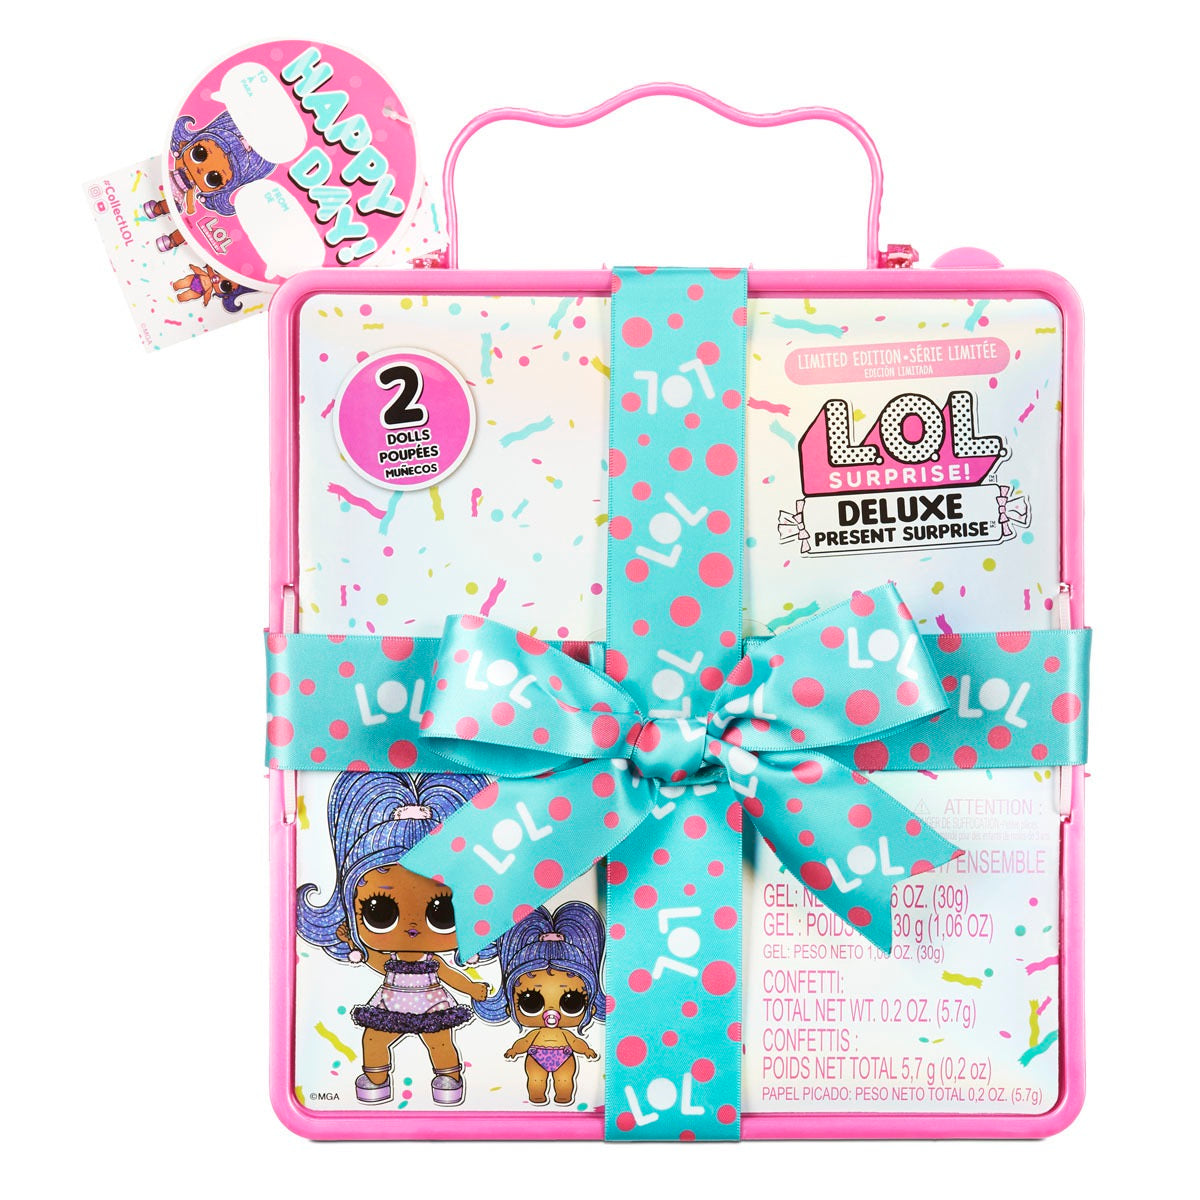 L.O.L. Surprise! Deluxe Present Surprise - Slumber Party with Exclusive Doll & Lil Sister